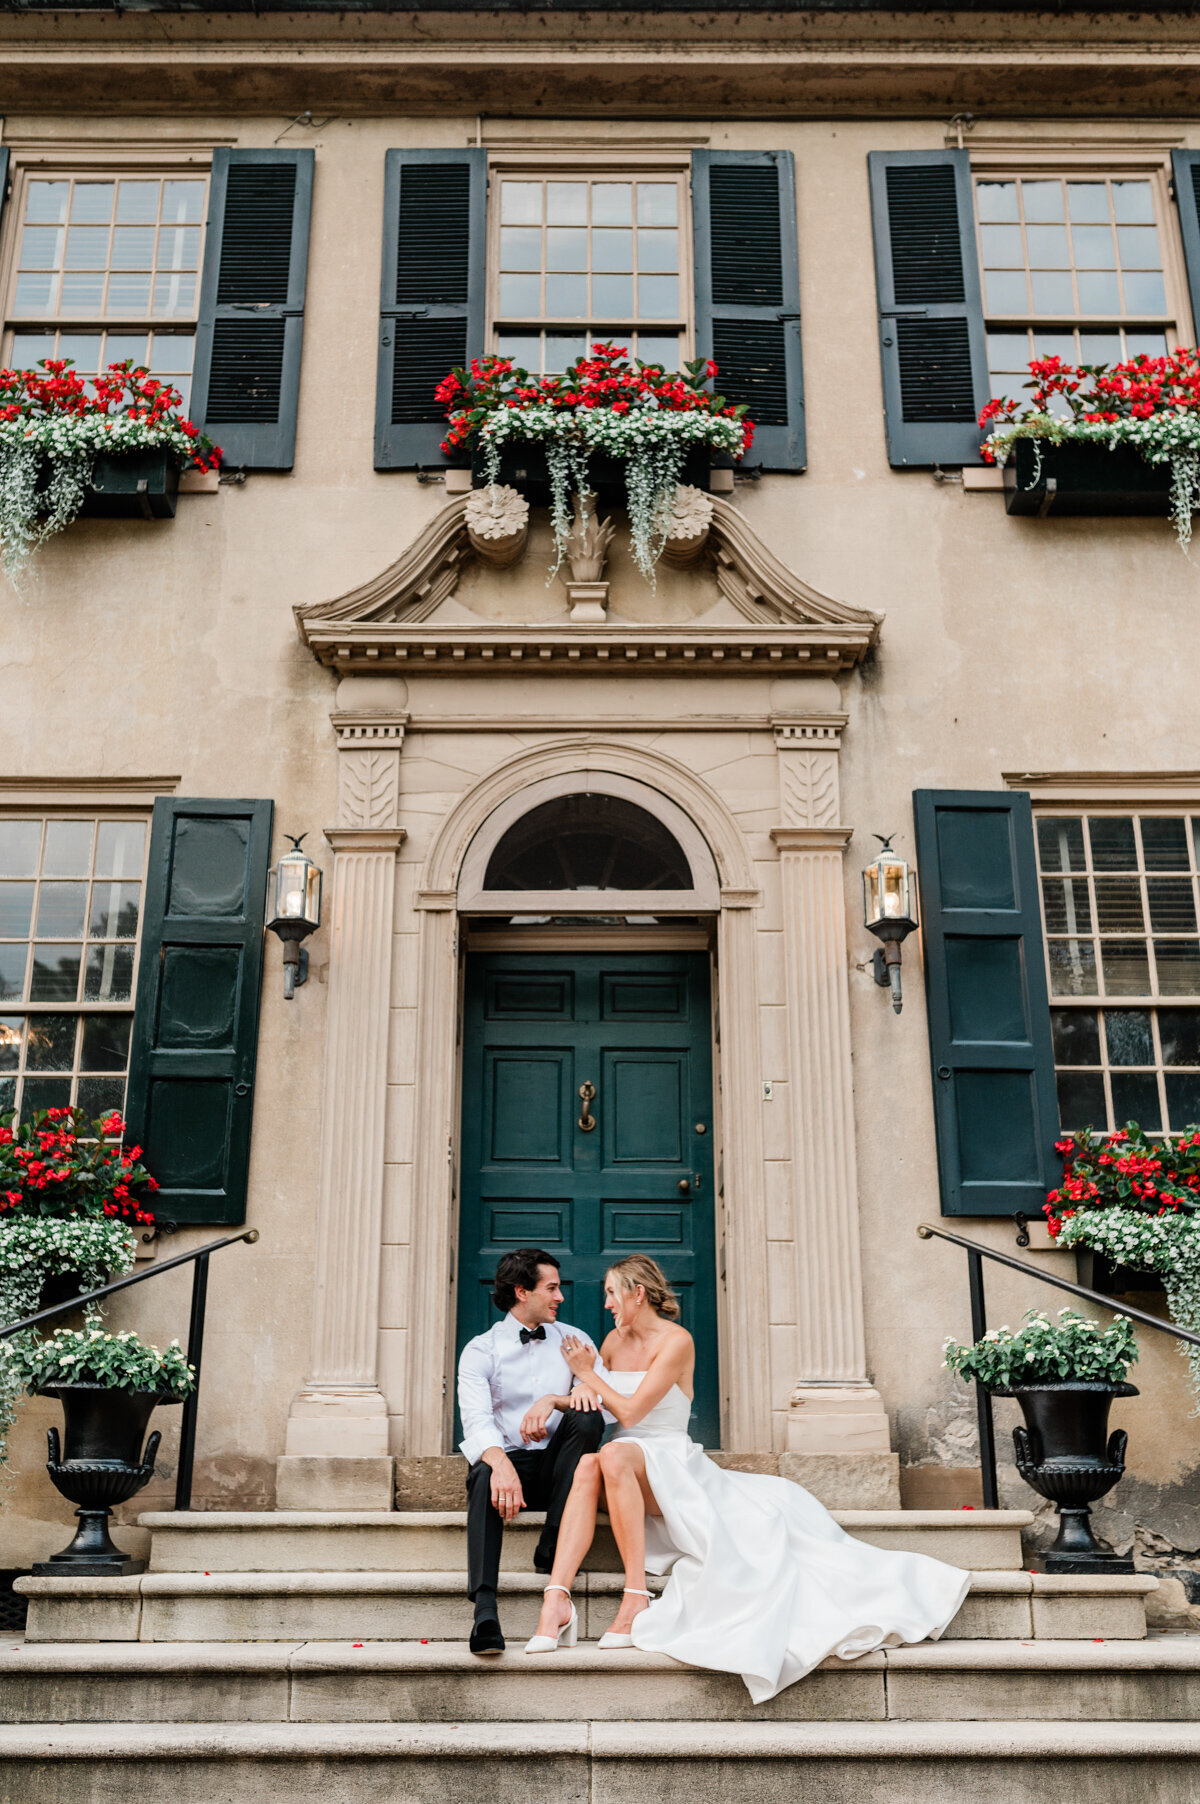 Cherish the Memories: Luxury Wedding Photography in Europe. Trust us to create a visual legacy that reflects the grandeur and emotion of your European celebration.